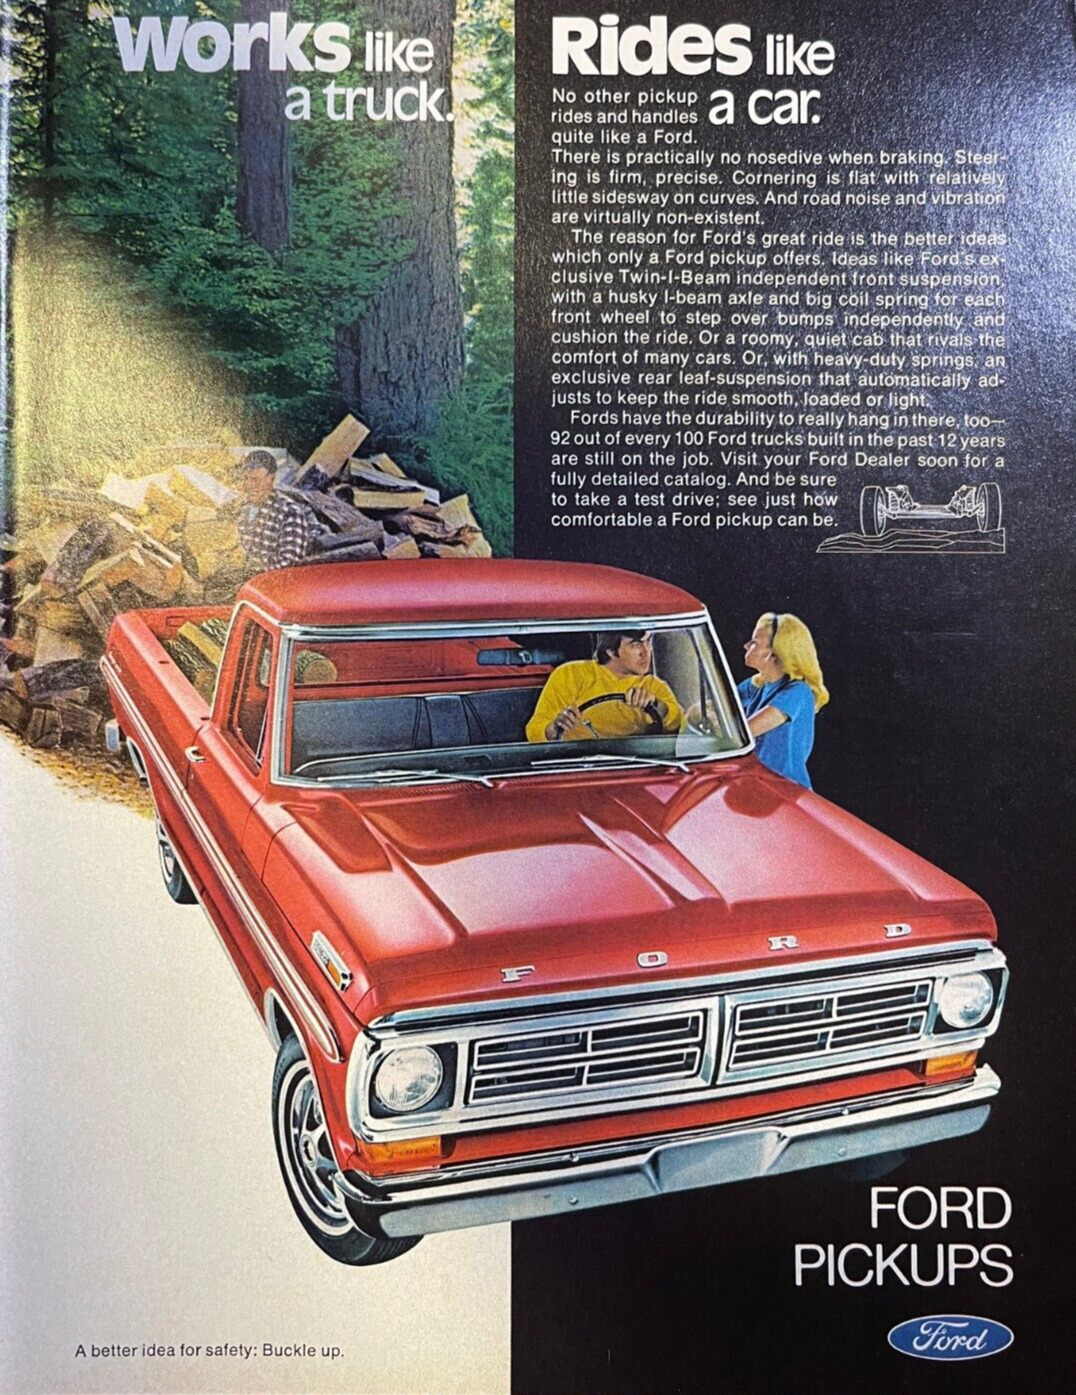 1972 Vintage Magazine Advertisement Ford Pickups Rides Like A Car